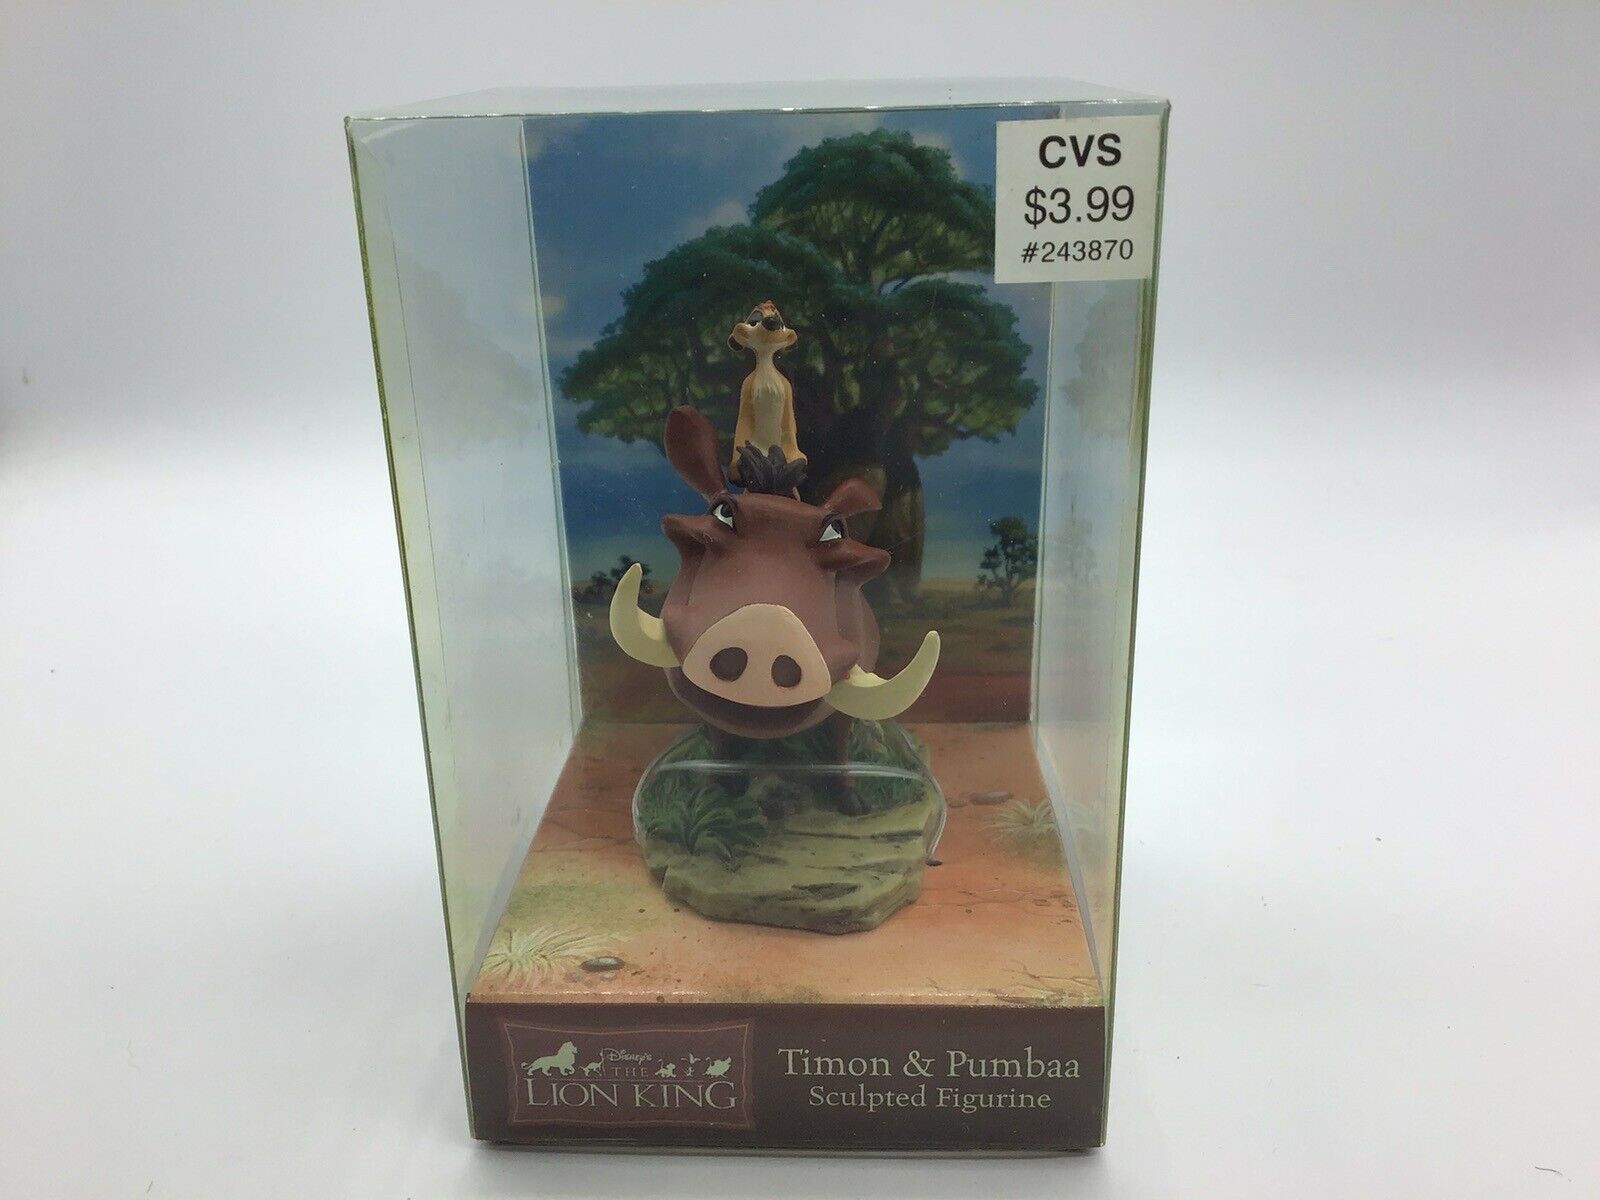 The Lion King Timon & Pumbaa Sculpted Figurine # 243870